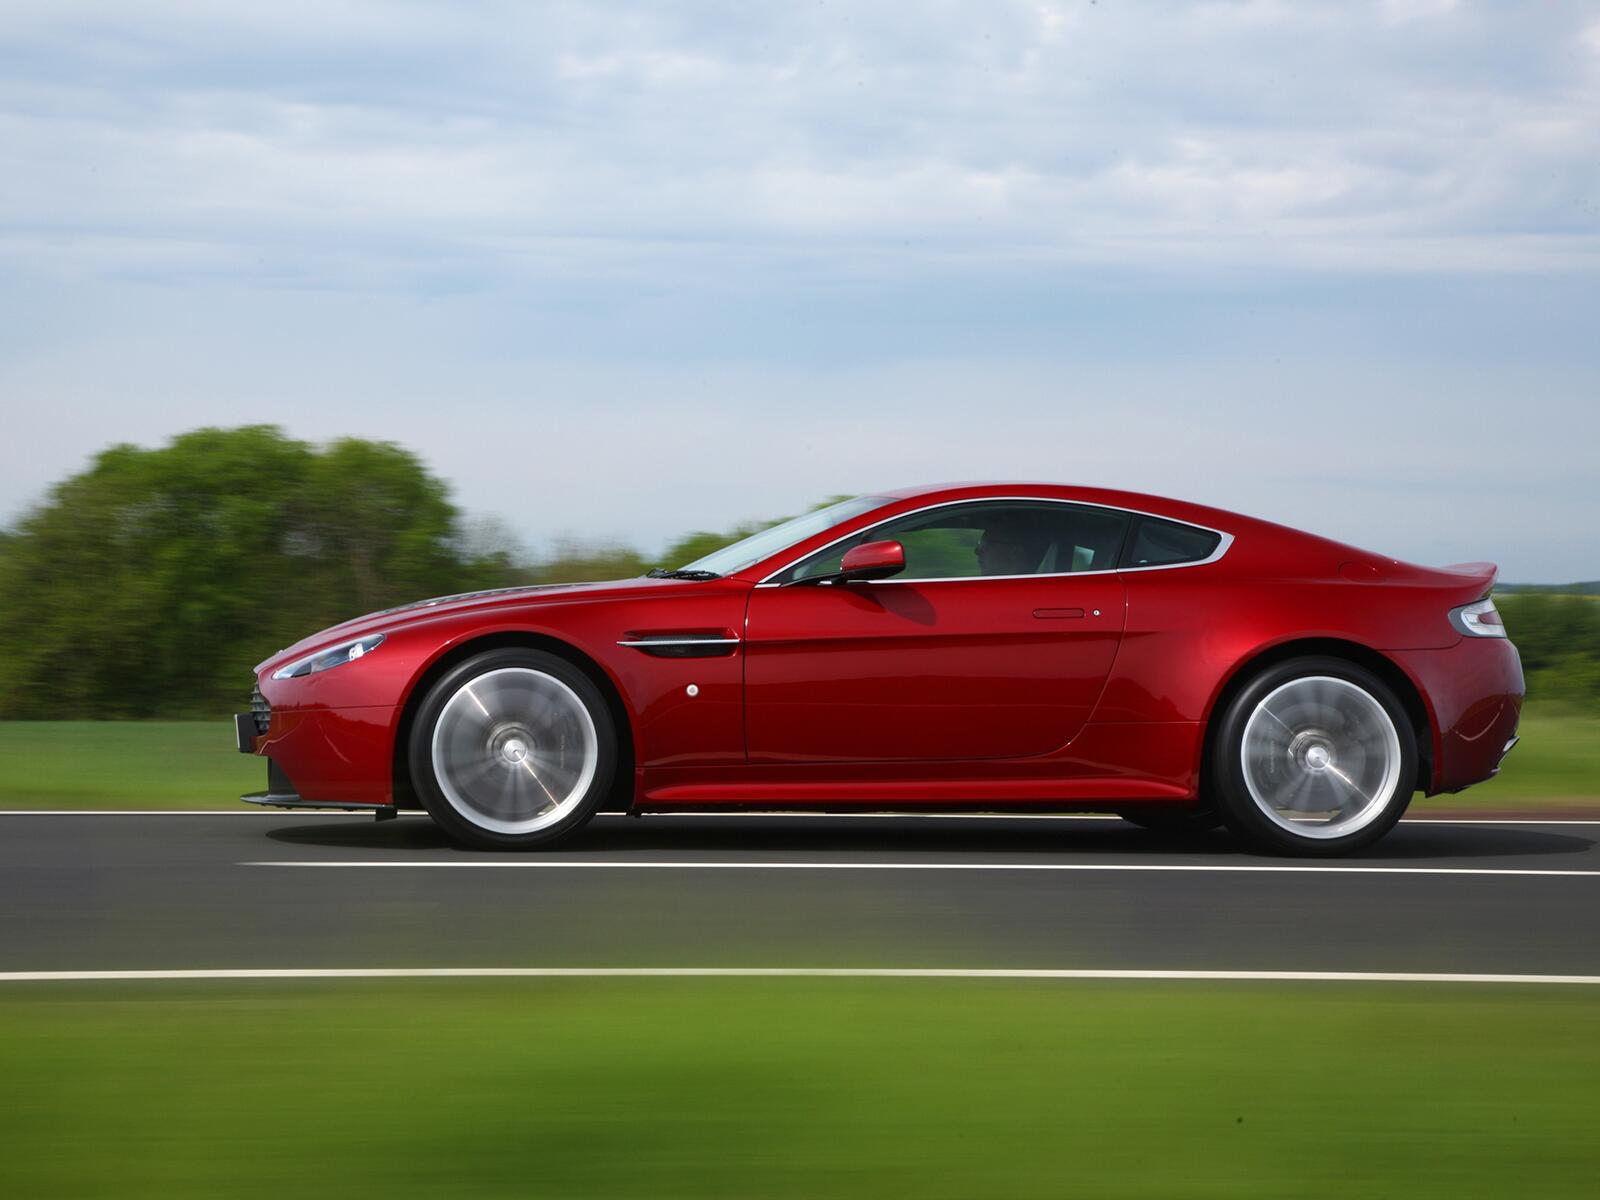 Free photo Aston Martin DB9 in red in motion